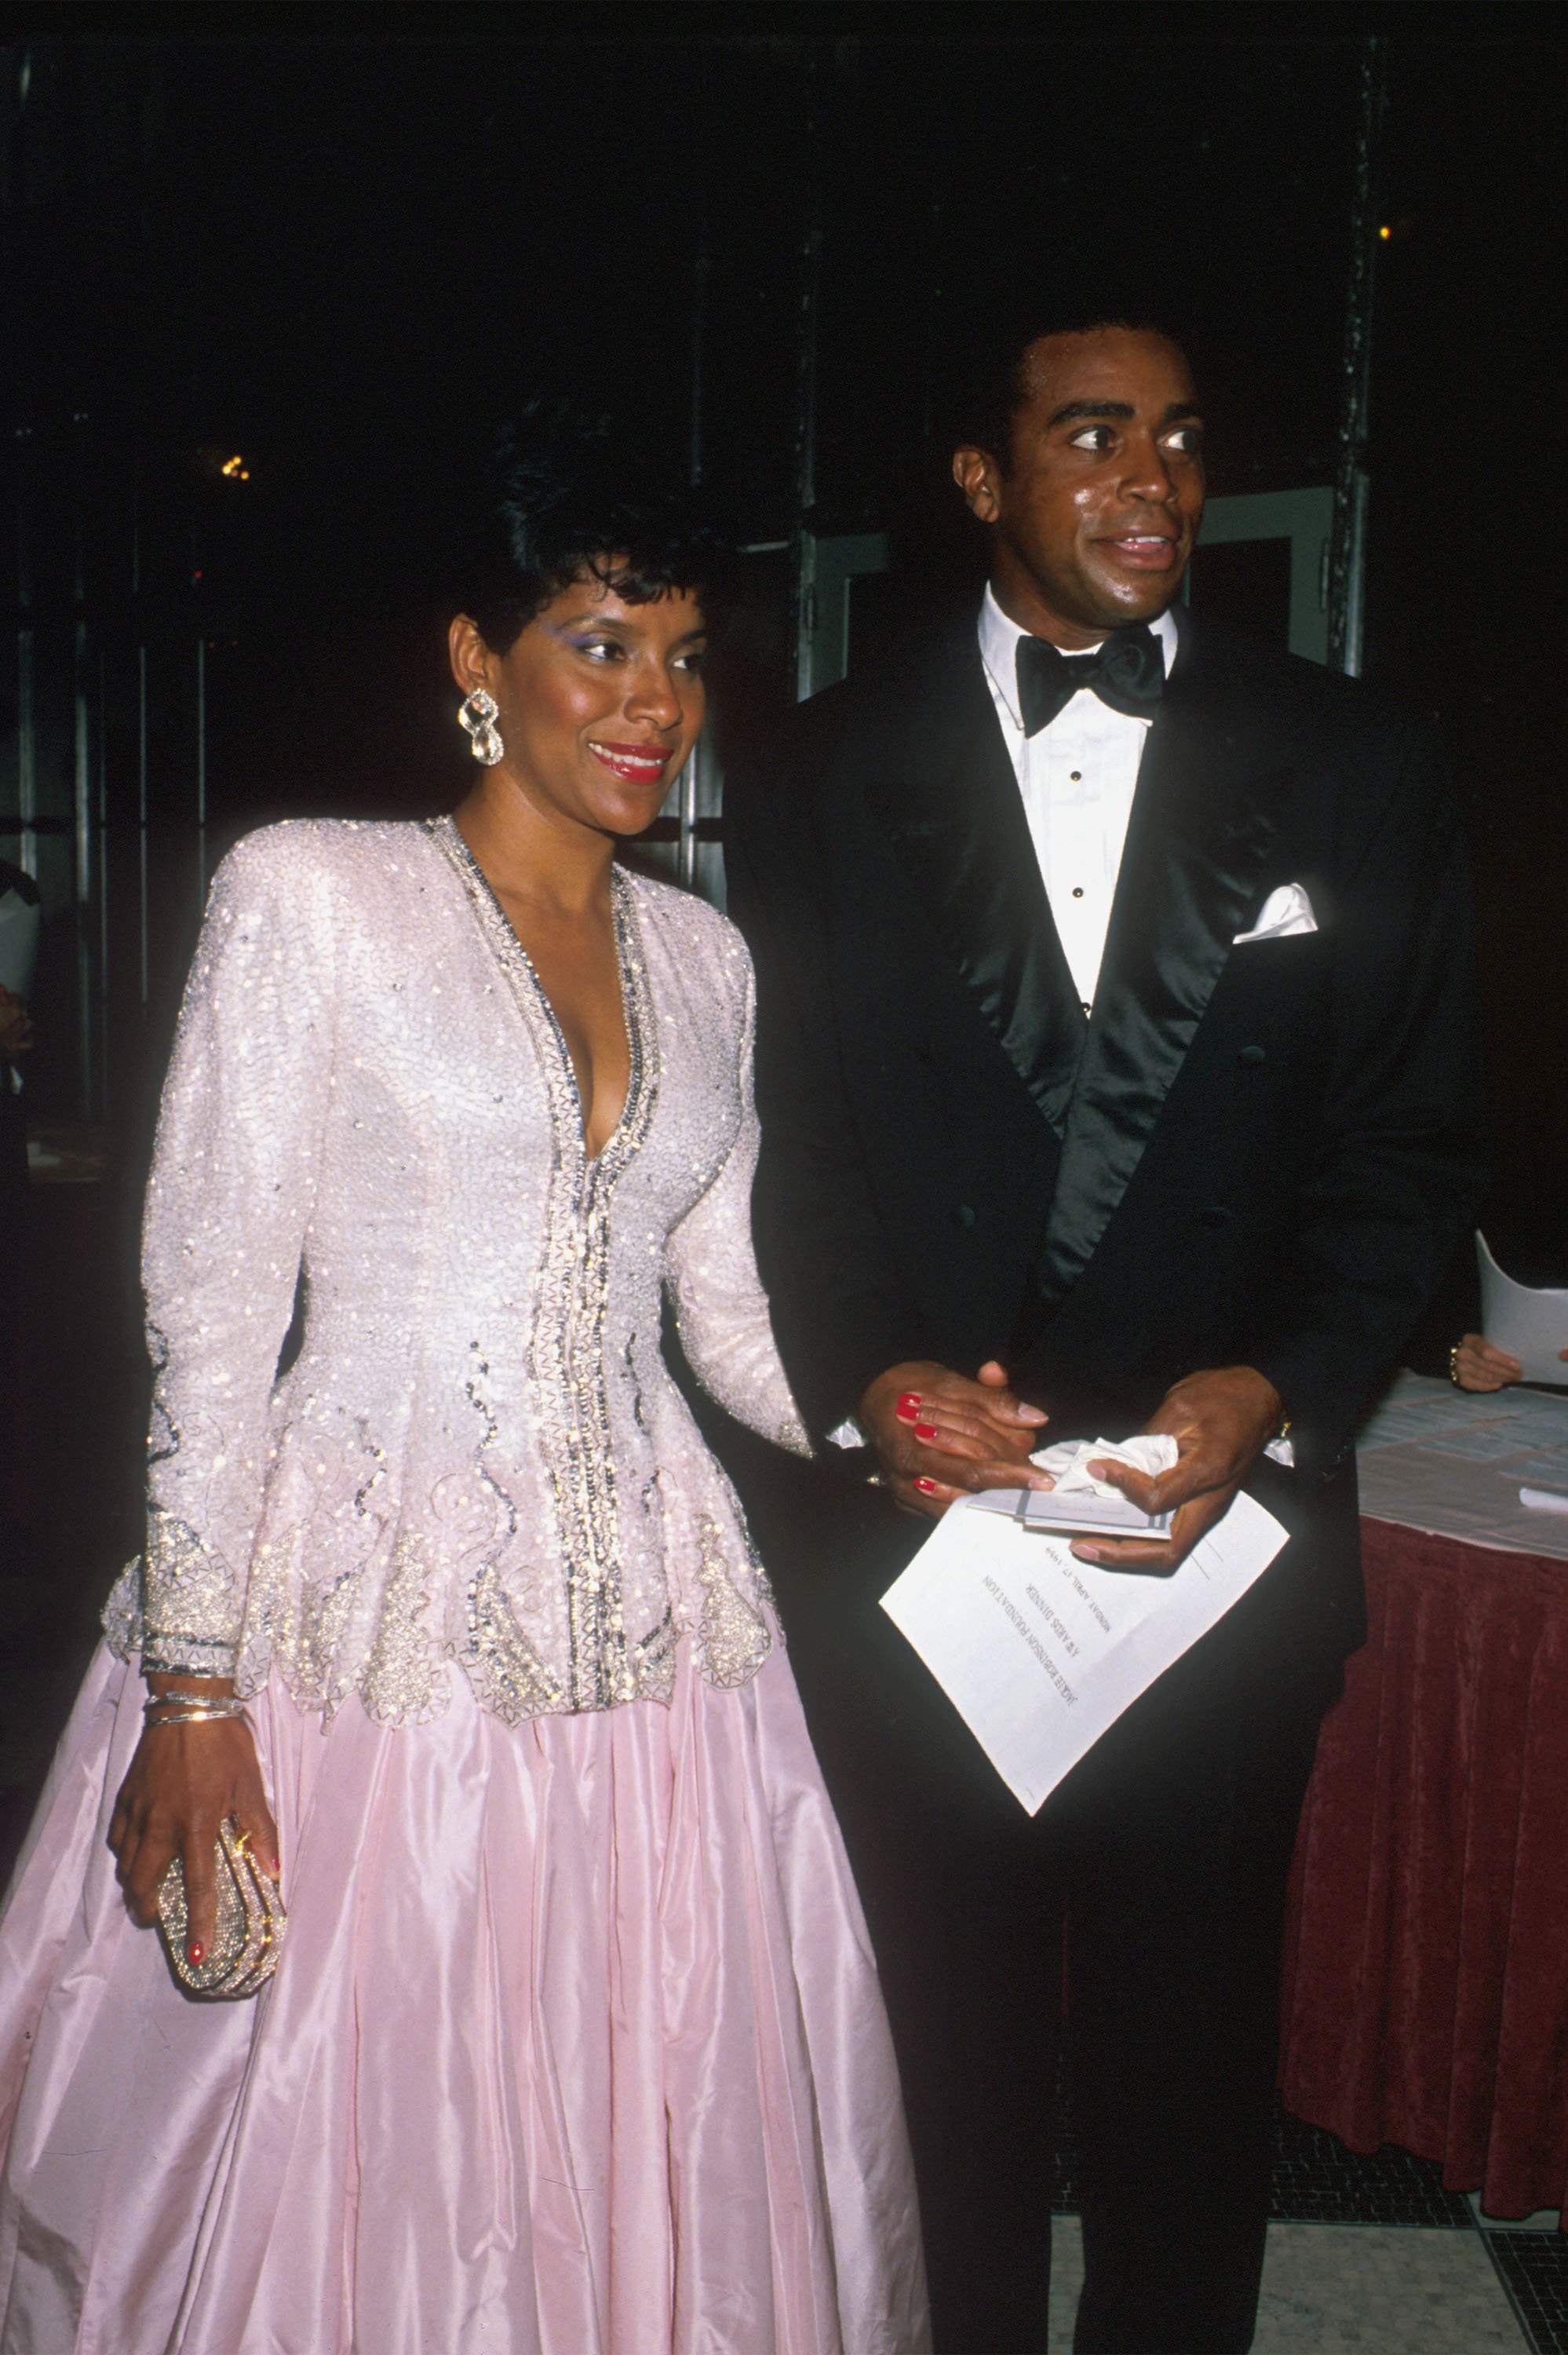 Phylicia Rashad and husband/sportscaster Ahmad Rashad arrive at an event in New York City, April 15, 1989. | Photo: Getty Images